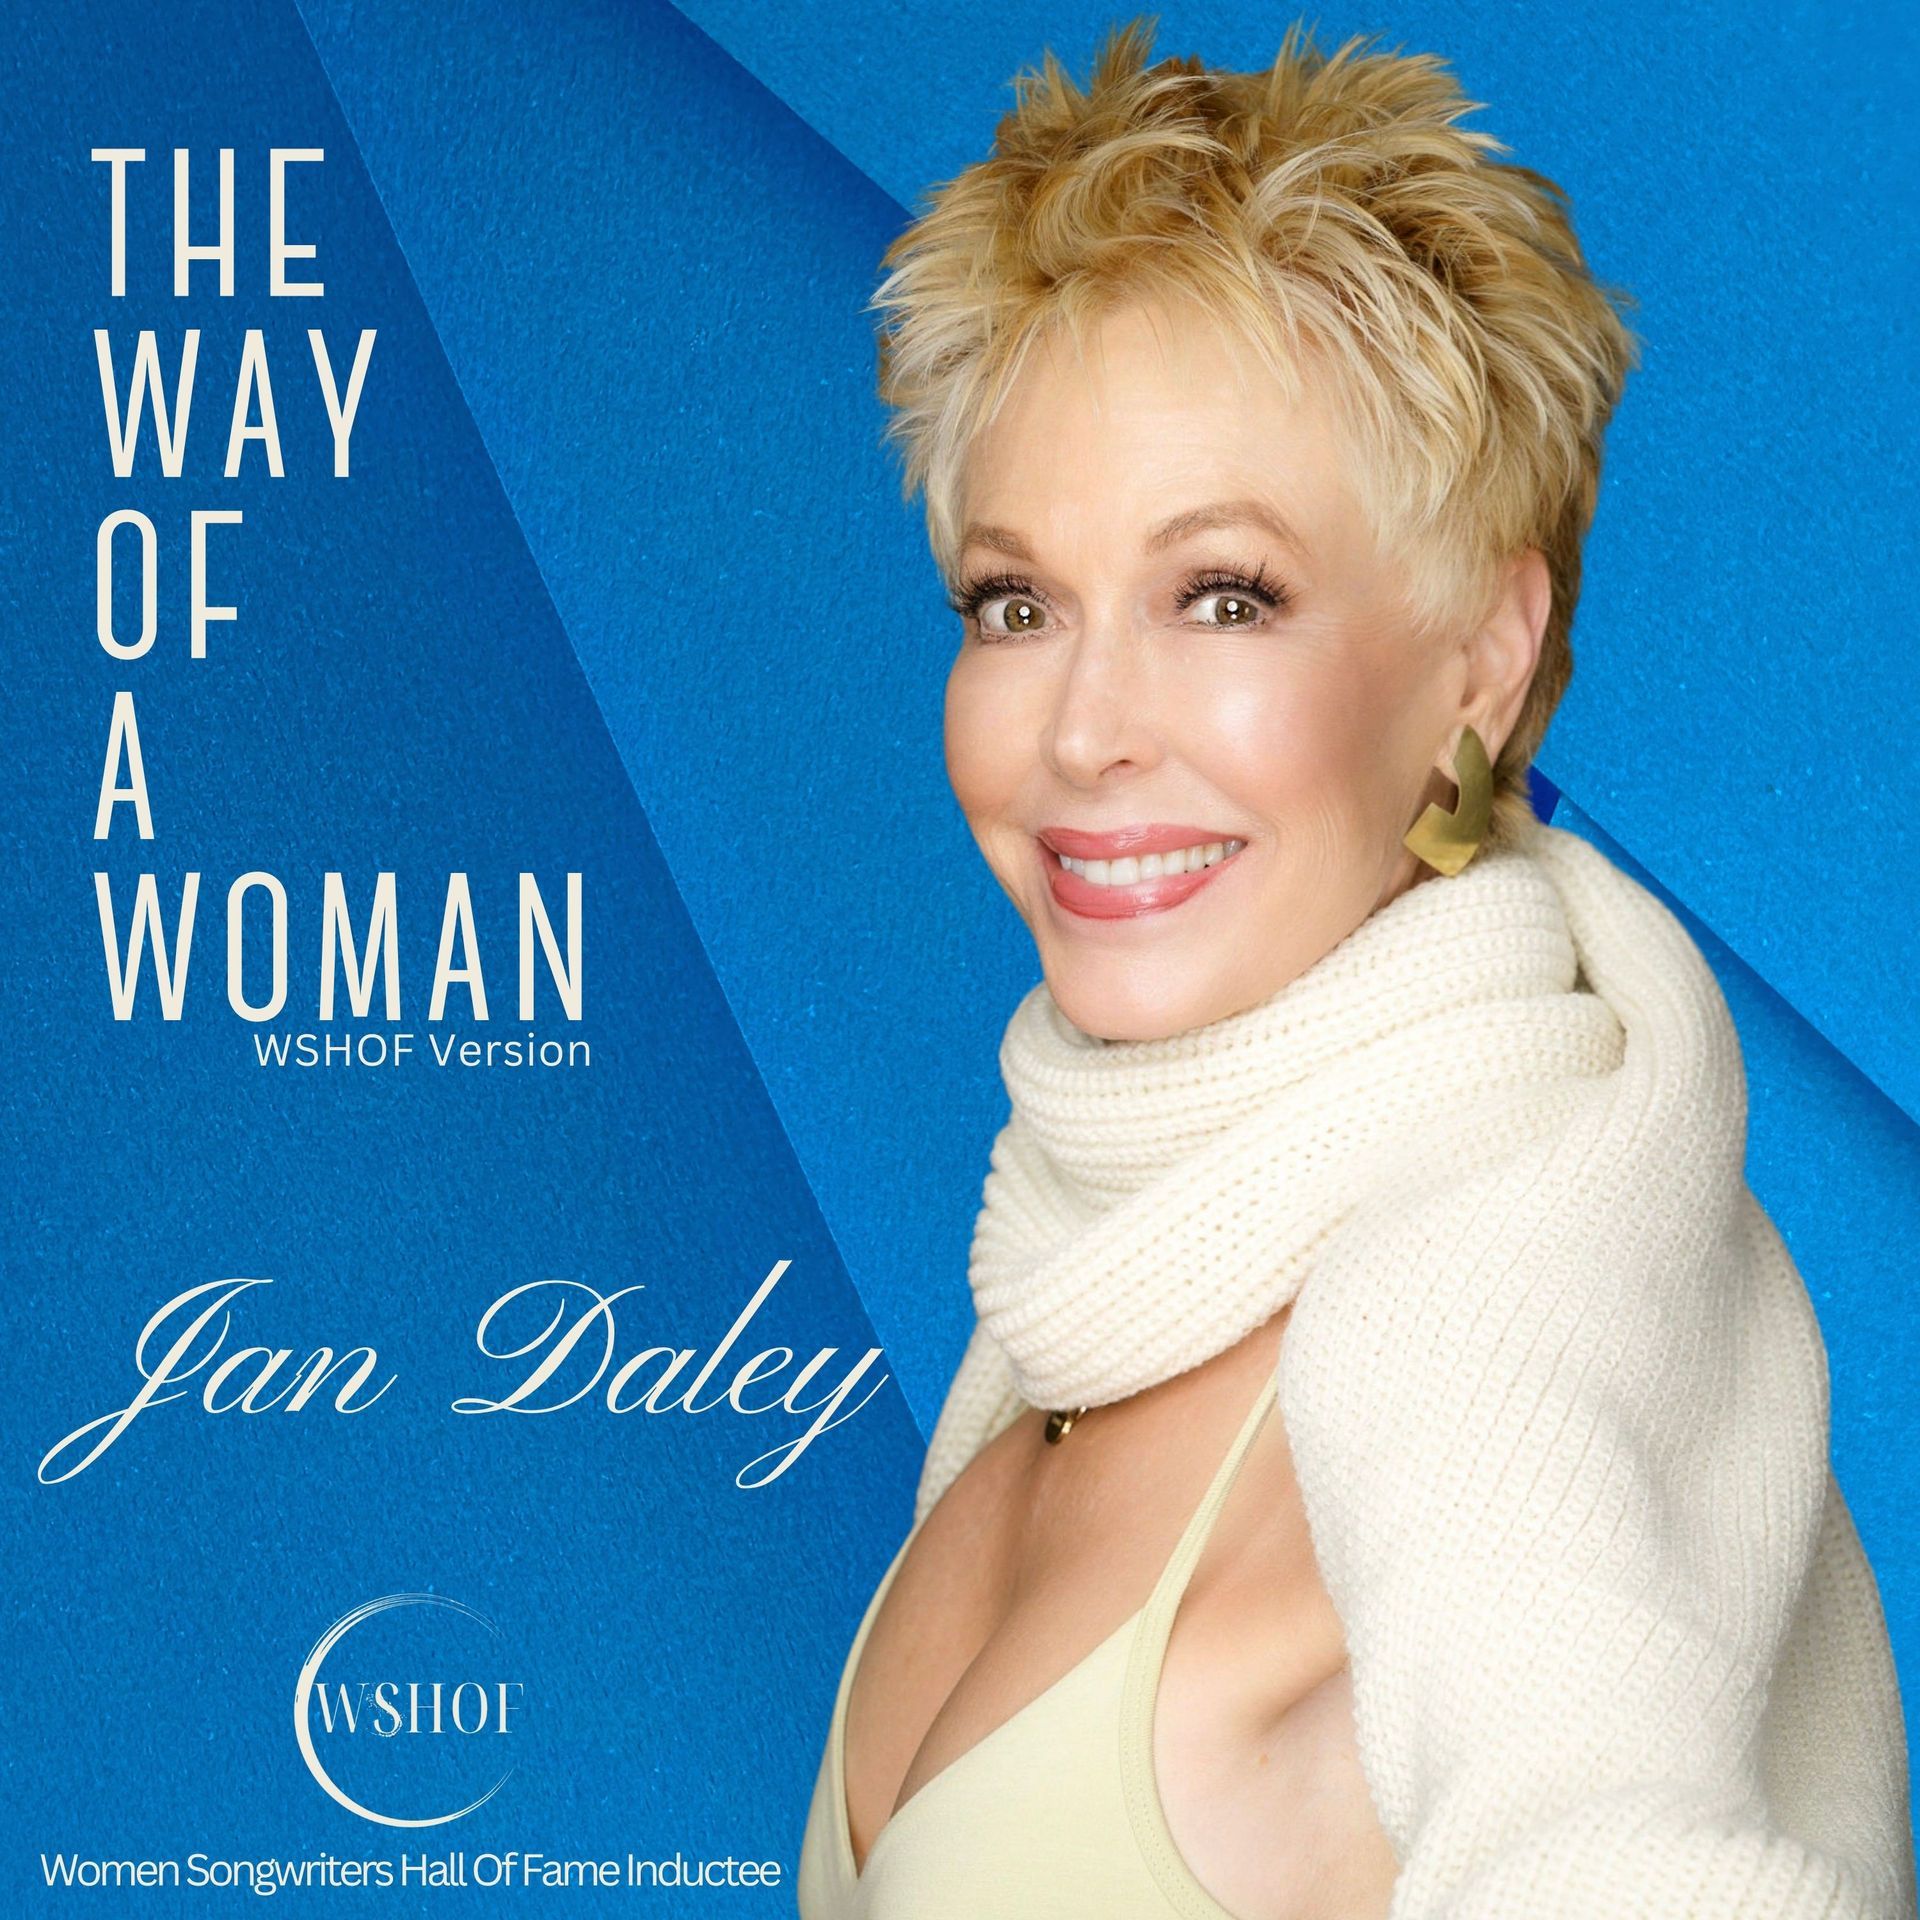 A woman is on the cover of the way of a woman